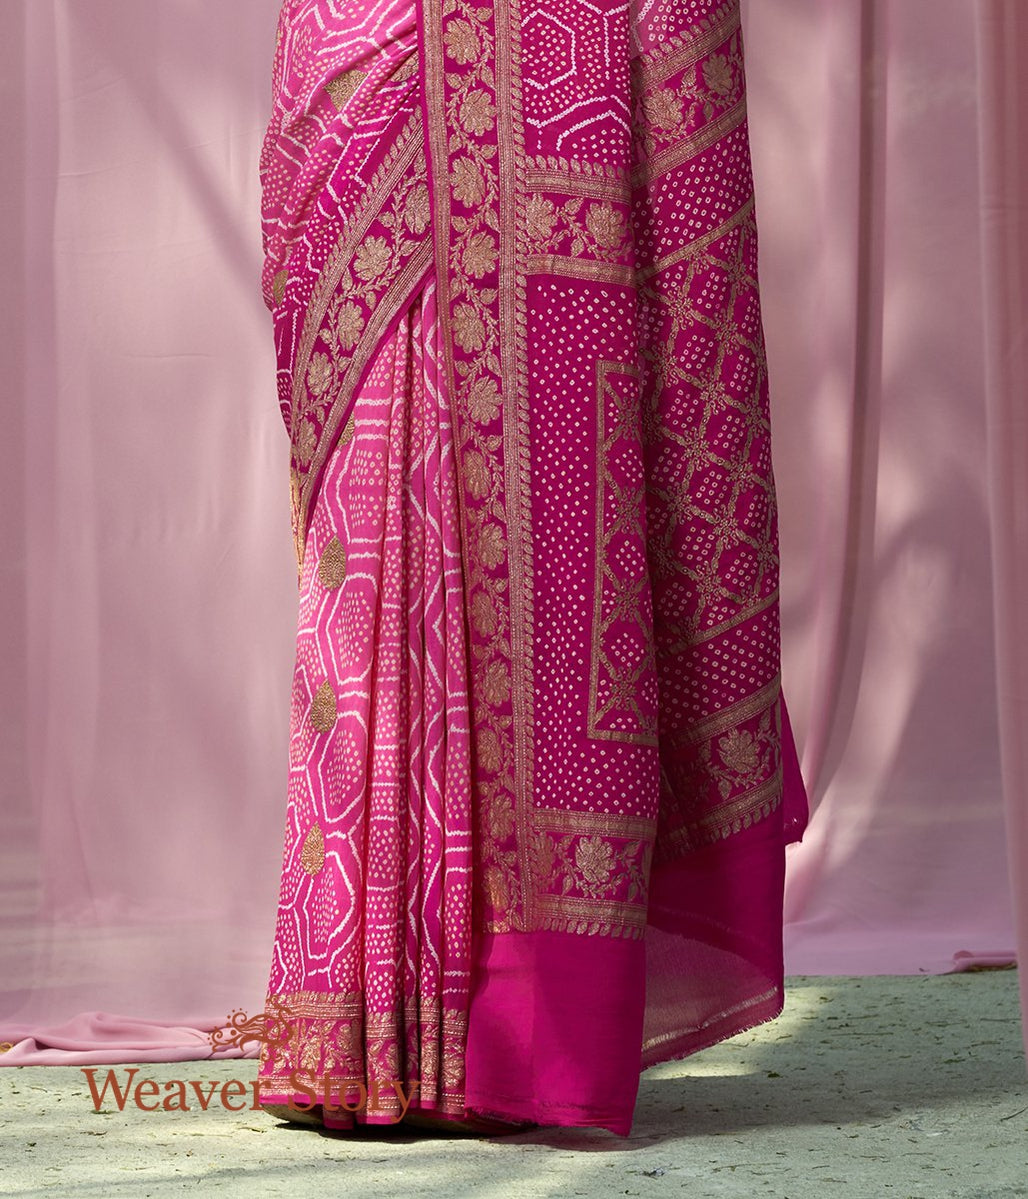 Handloom_Pink_Ombre_Dyed_Bandhej_Saree_WeaverStory_04